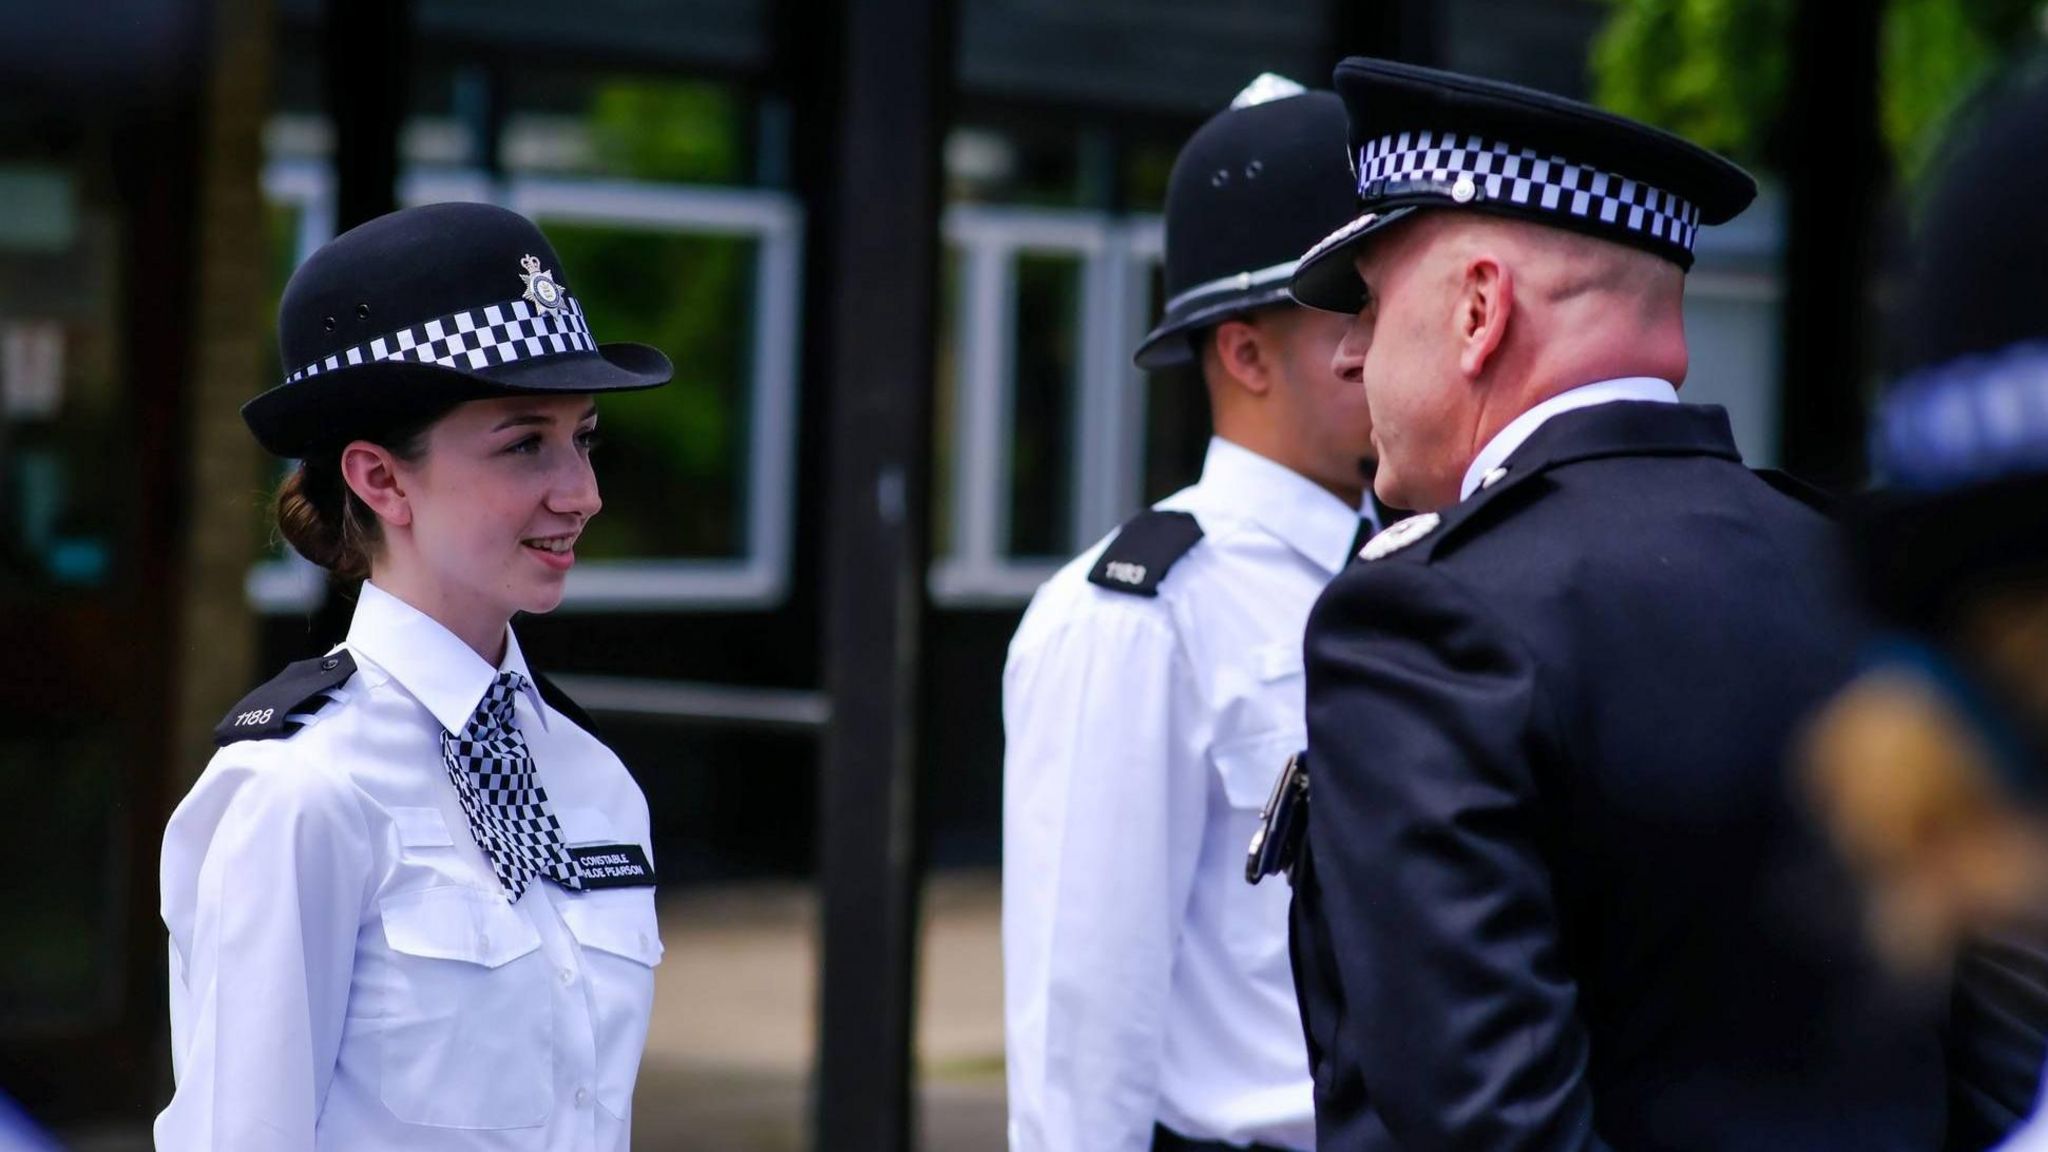 A police officer with police recruits 